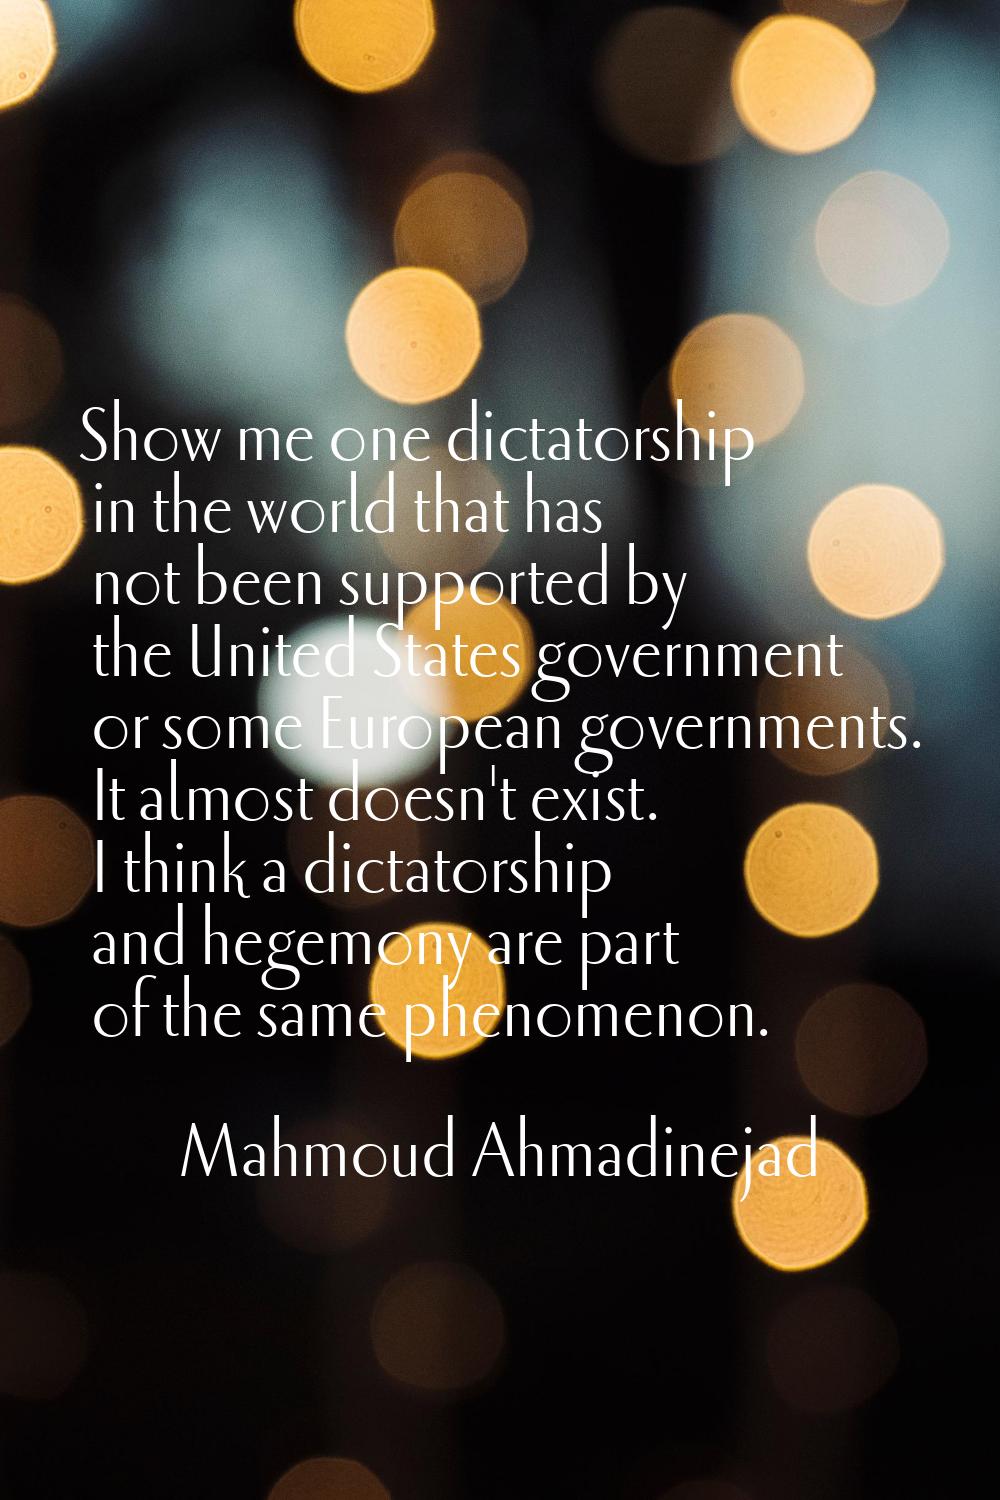 Show me one dictatorship in the world that has not been supported by the United States government o